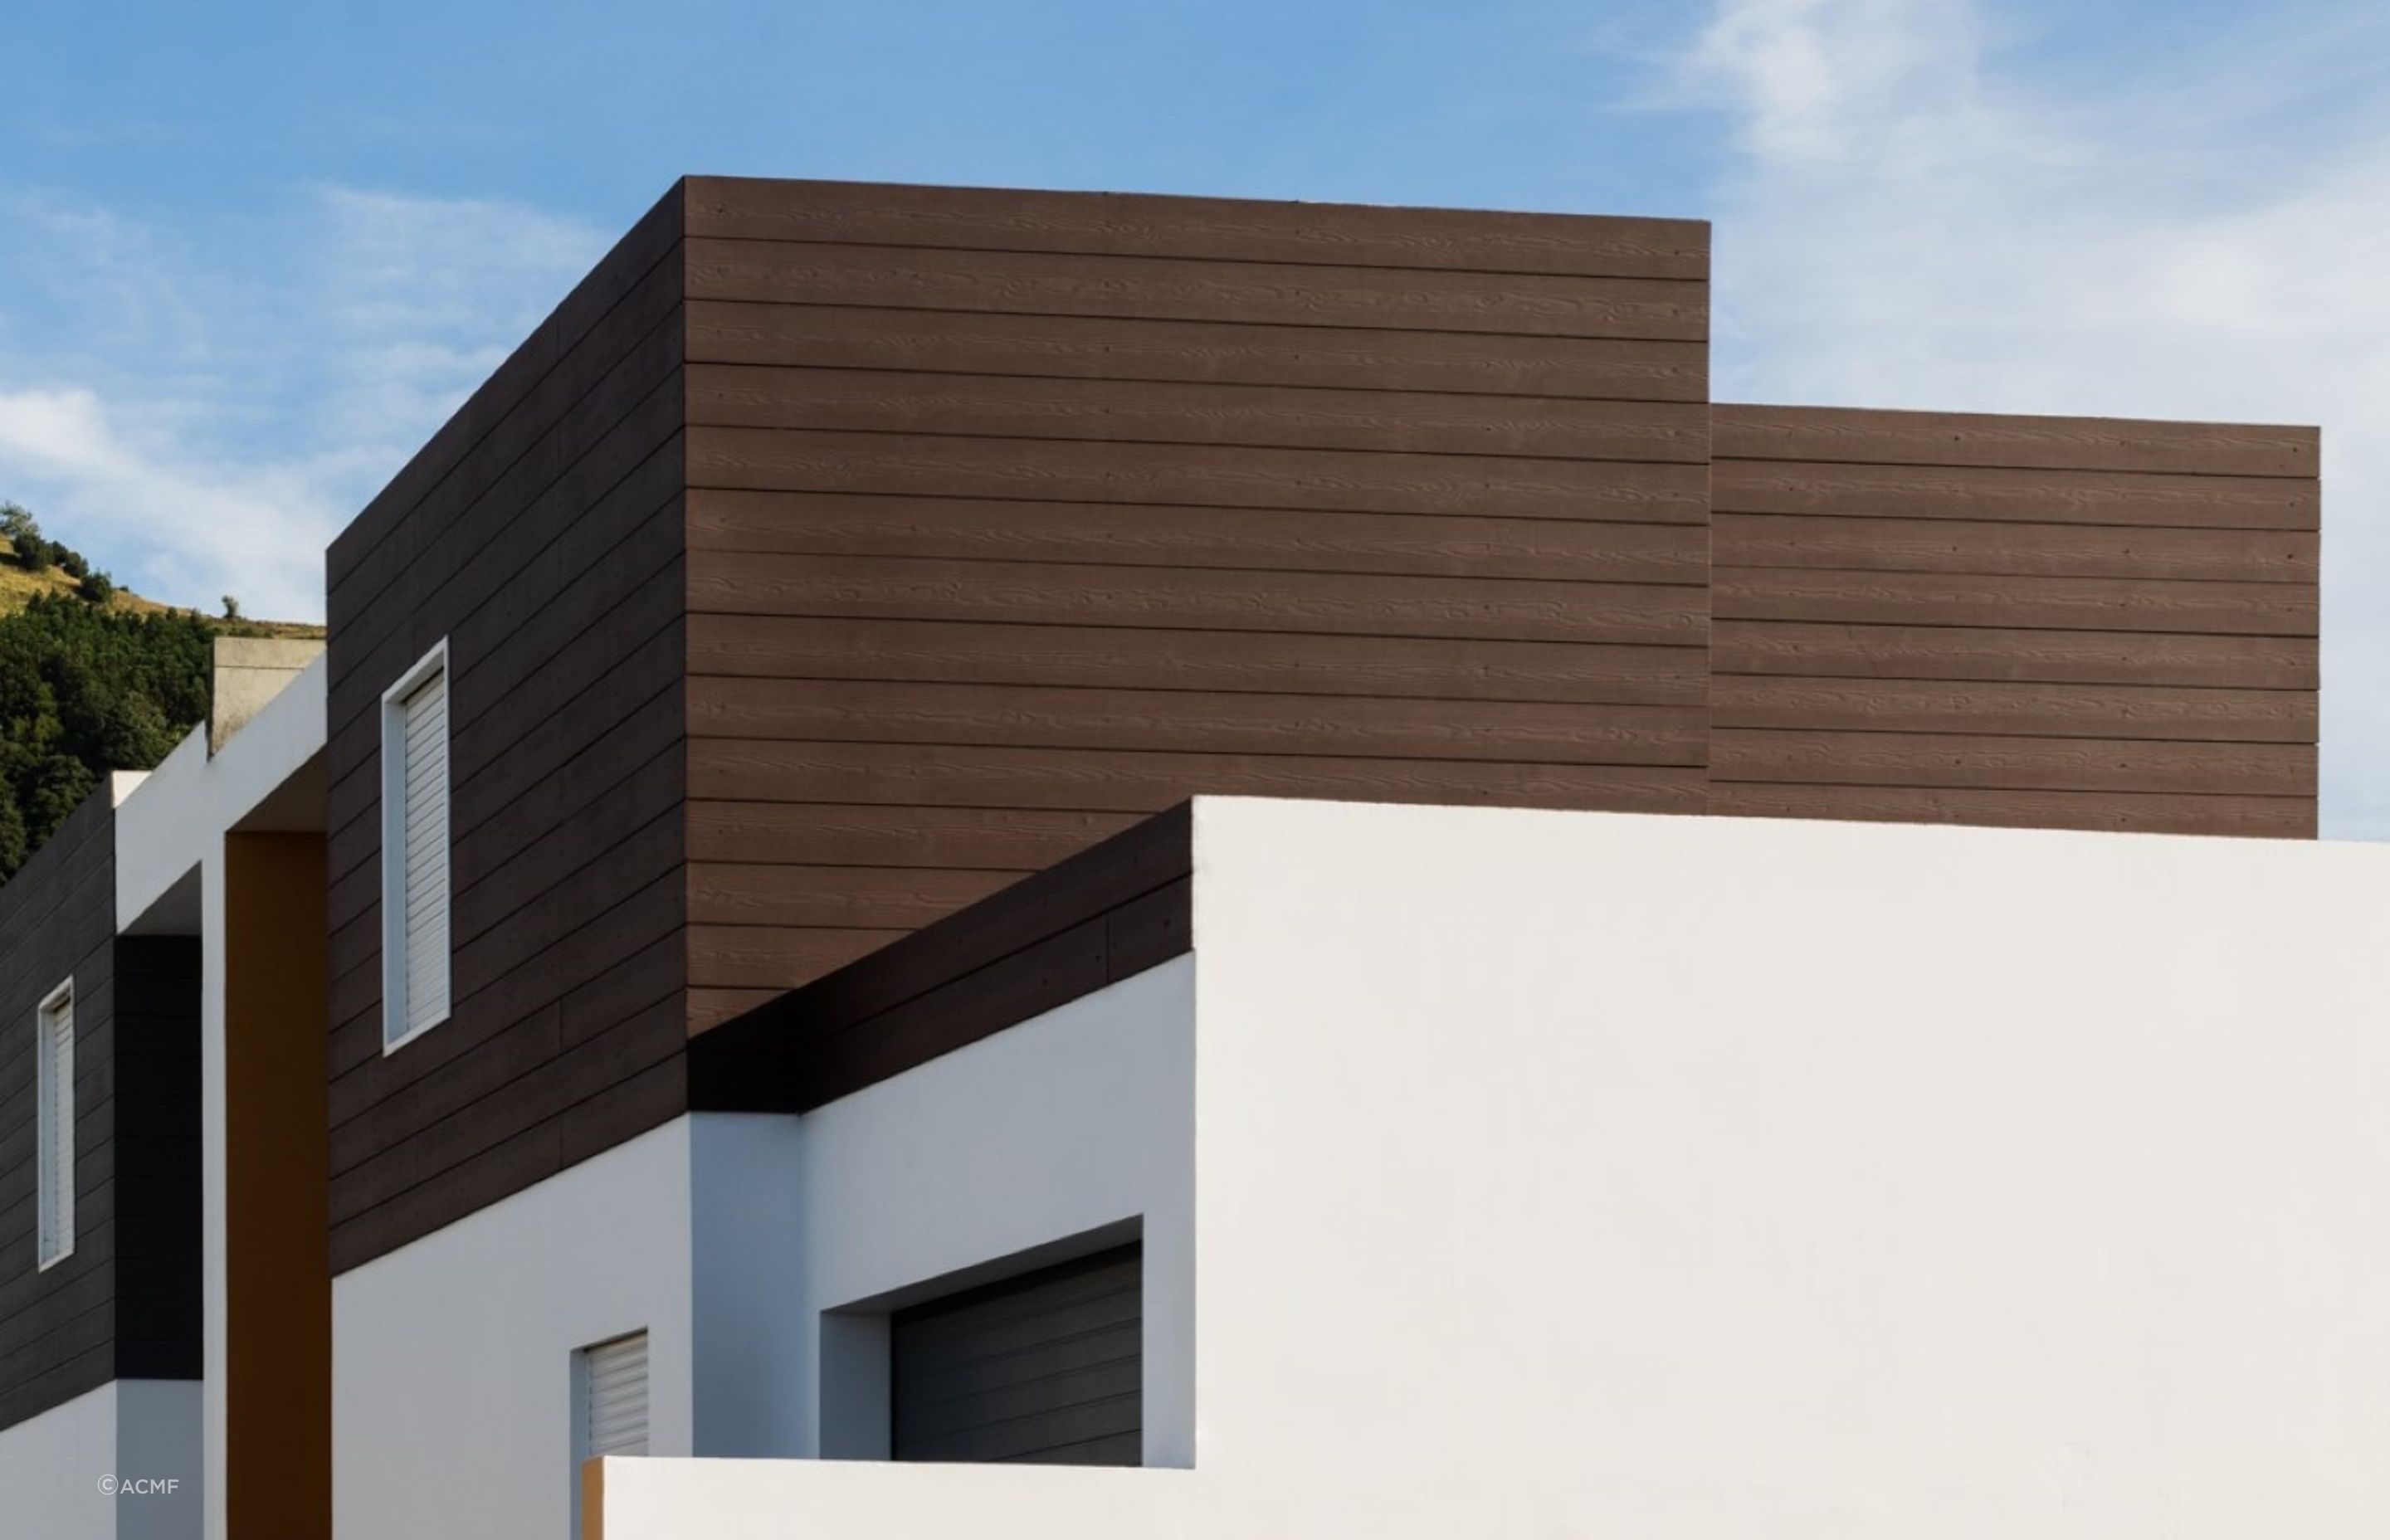 Stylish and sophisticated Cedral Fibre Cement Cladding.